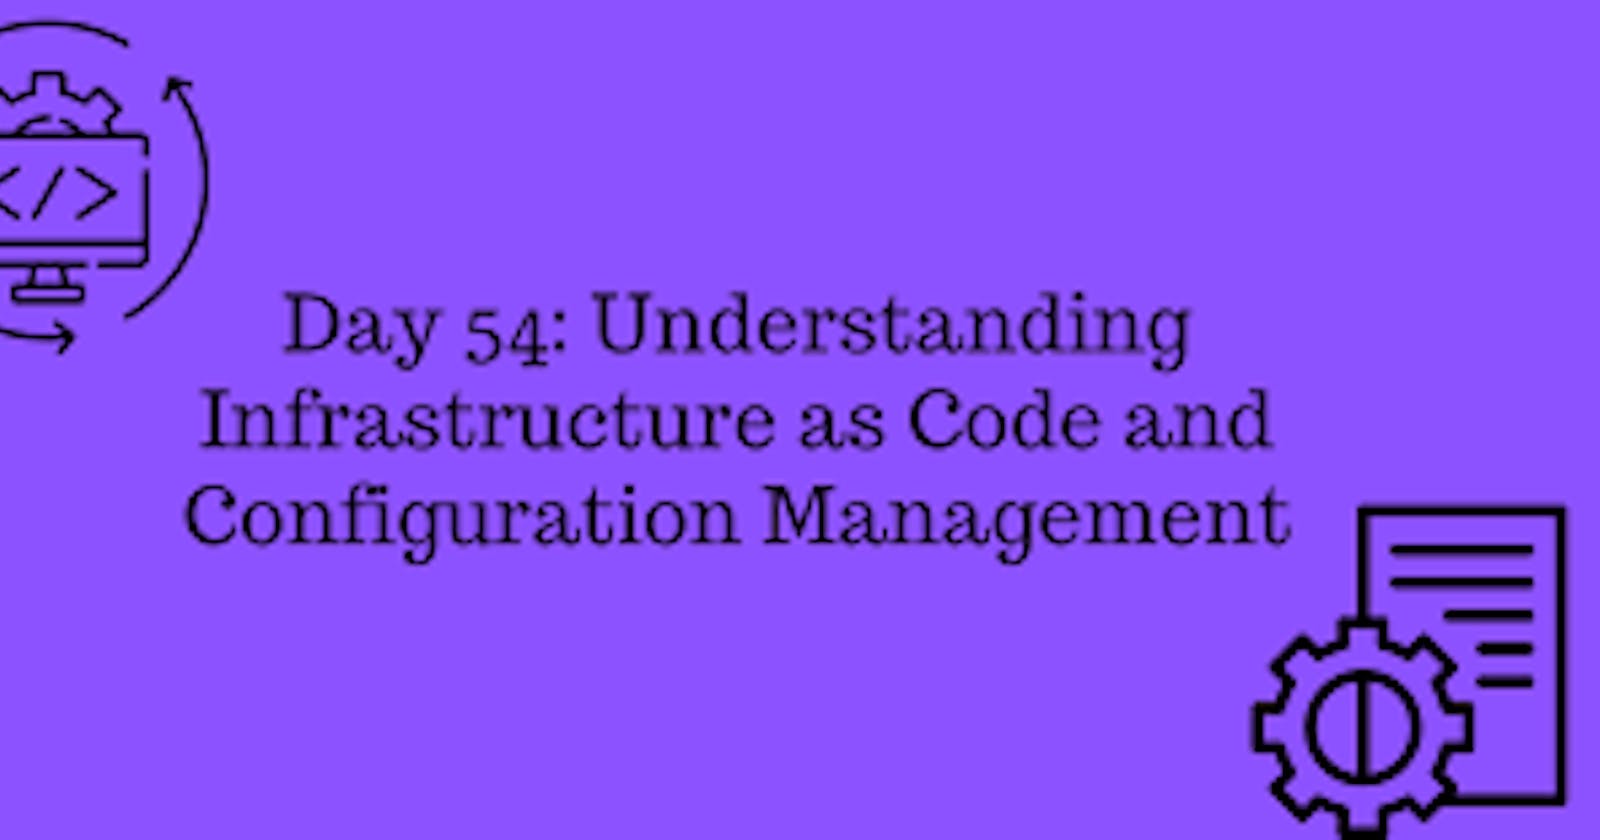 Day 54: Understanding Infrastructure as Code and Configuration Management